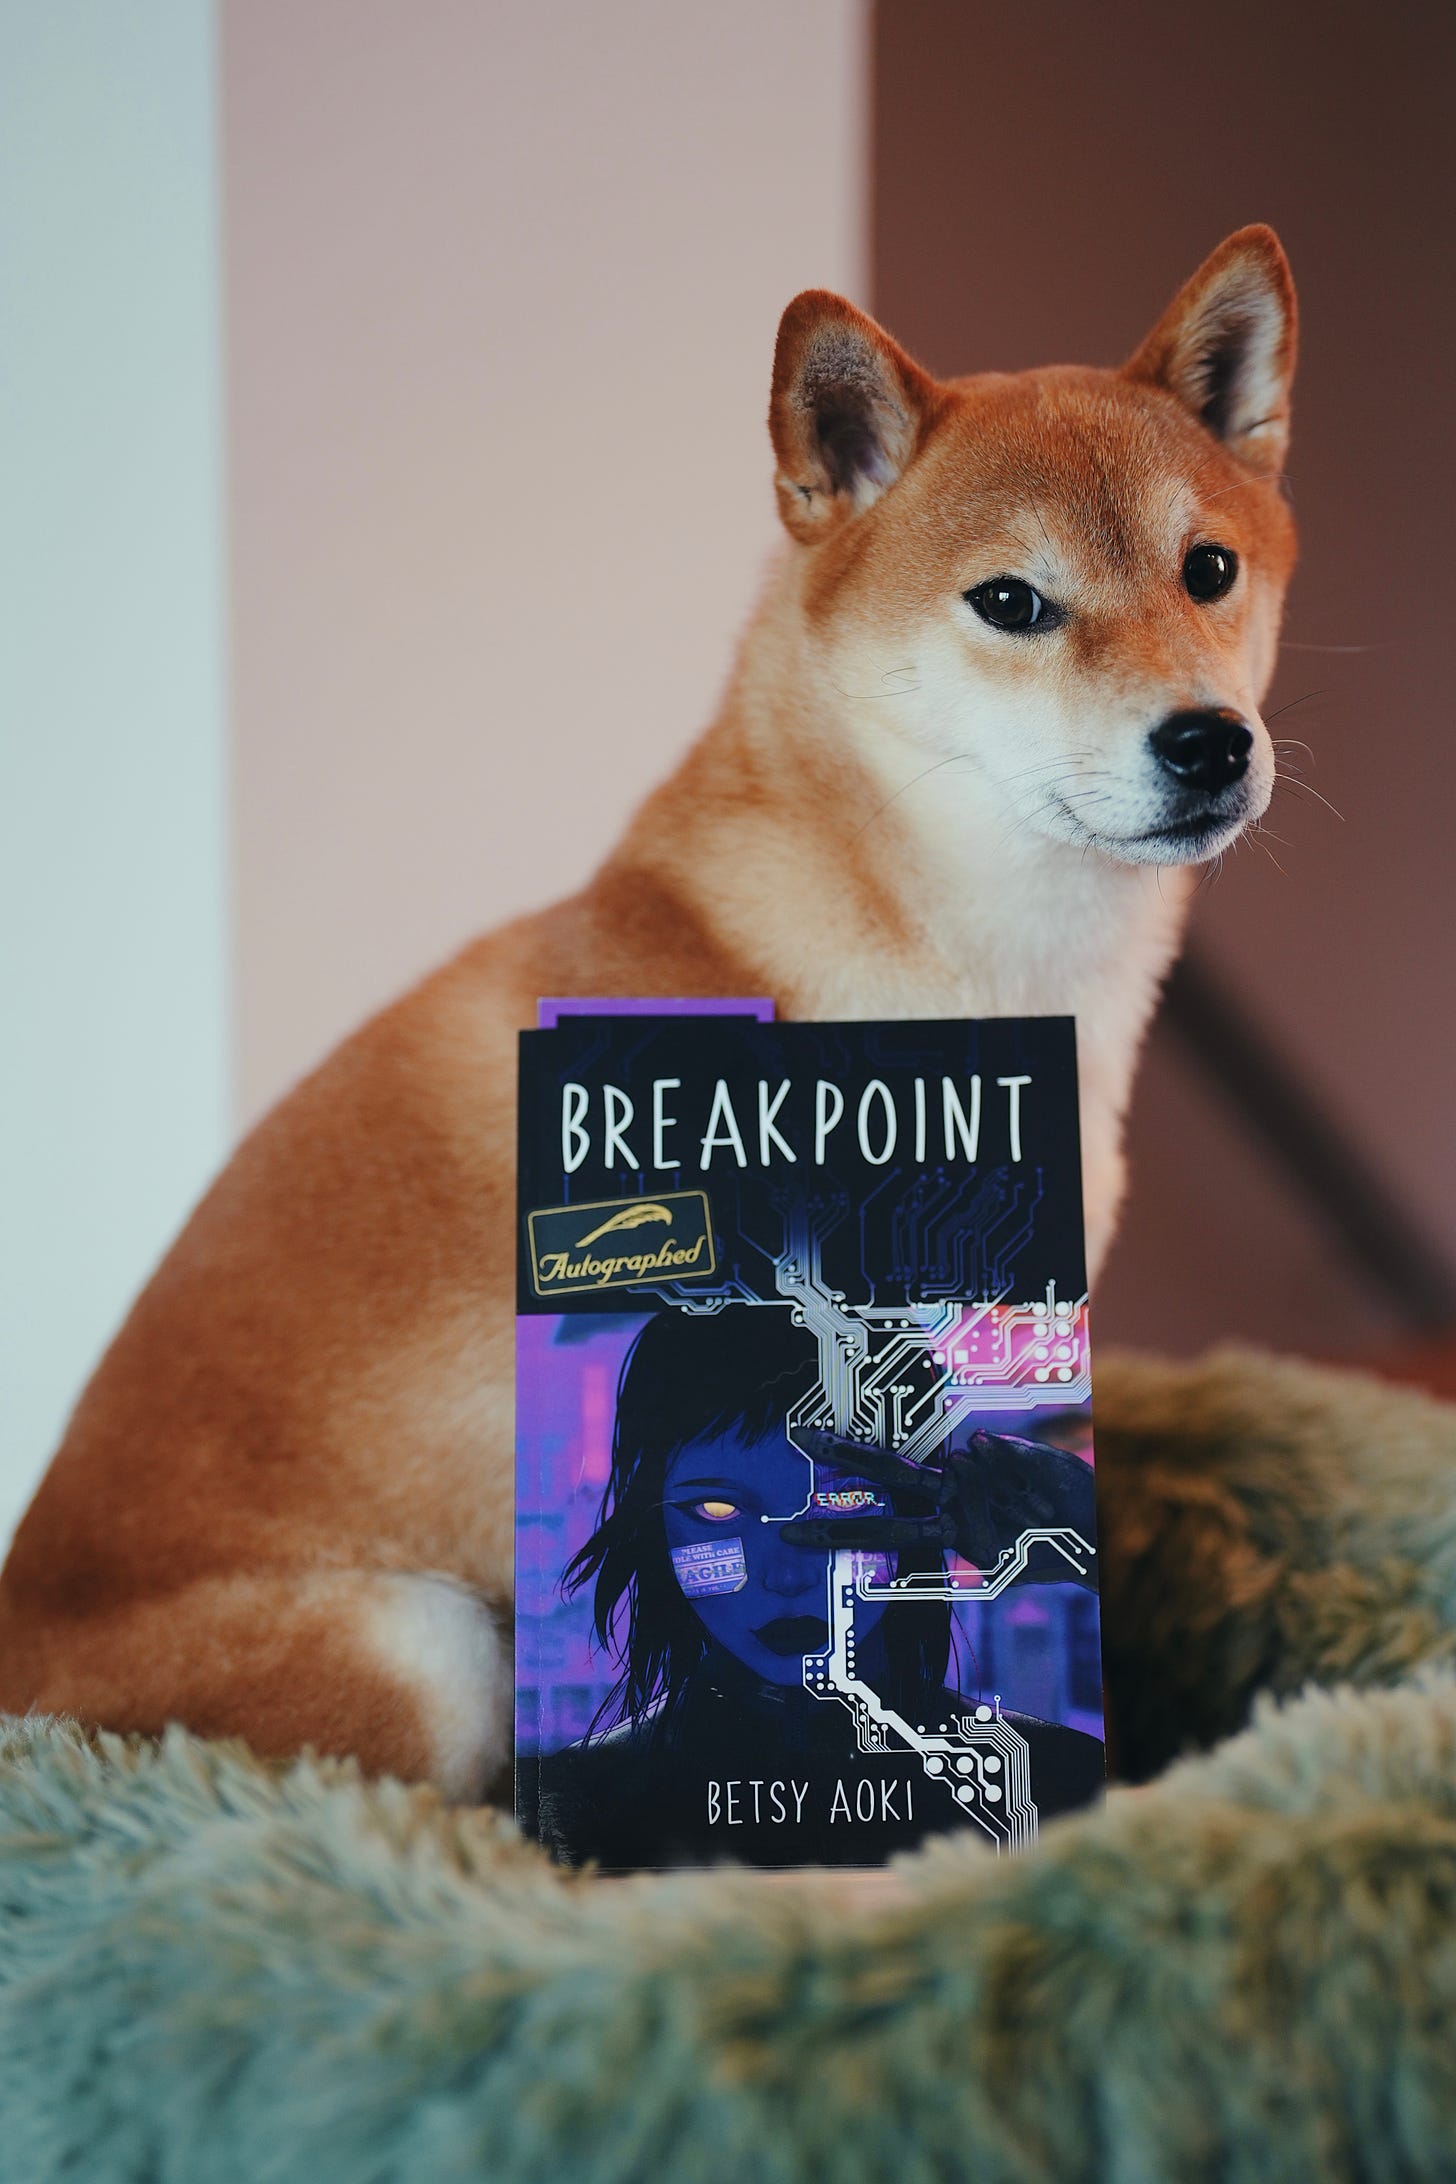 A shiba inu looking at the viewer, sitting in a fluffy green bed. She is beside a book: Breakpoint, by Betsy Aoki.